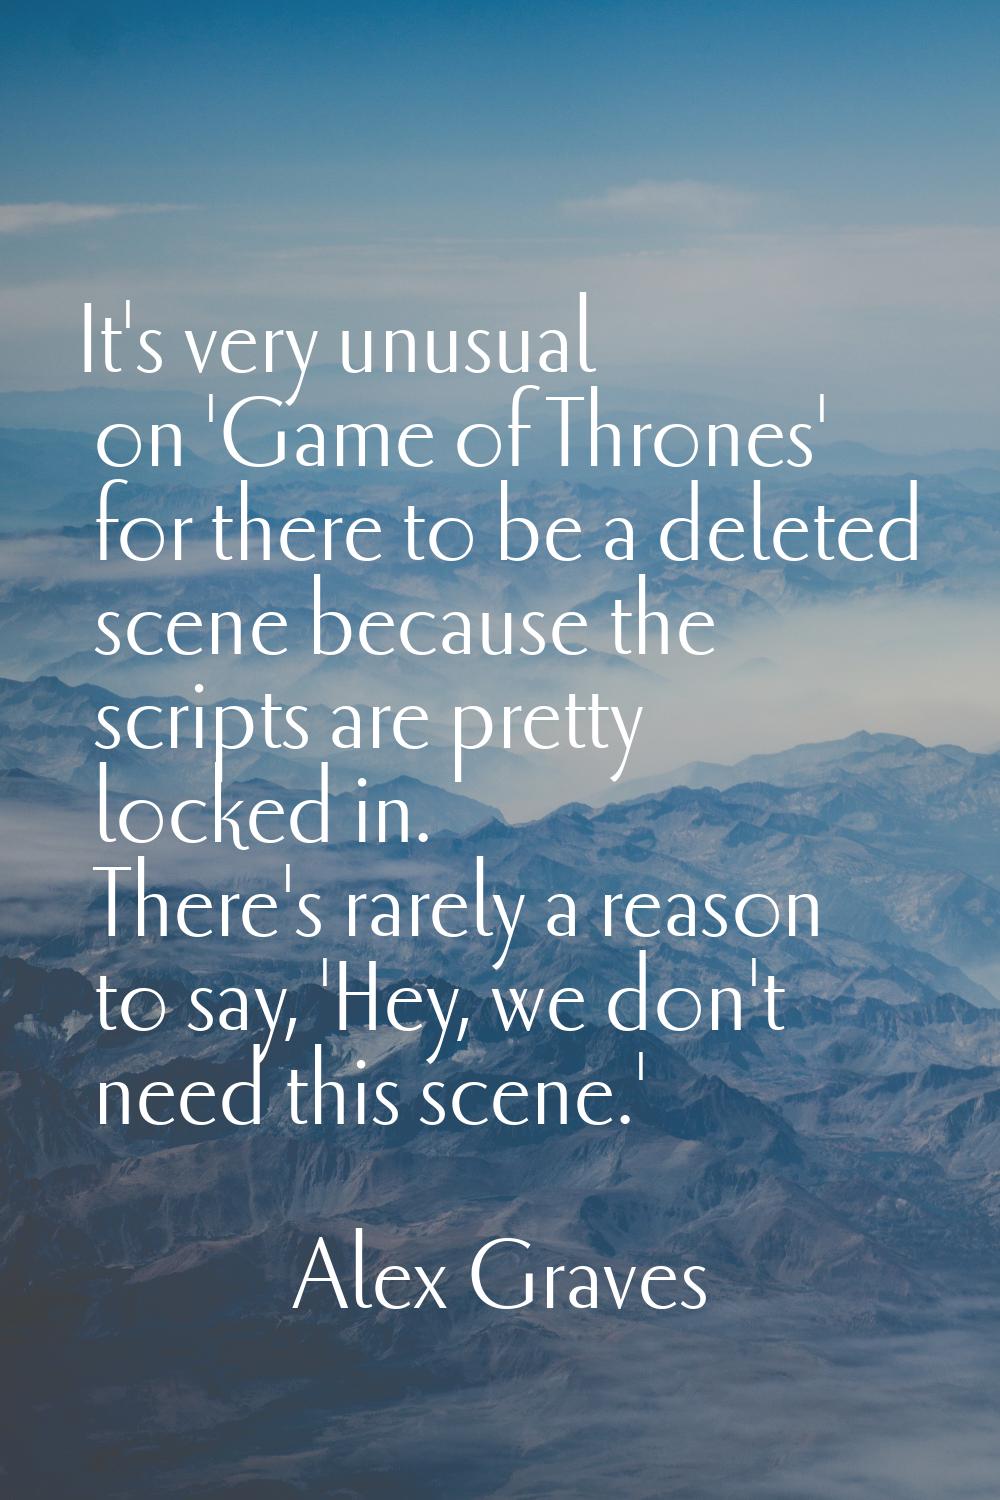 It's very unusual on 'Game of Thrones' for there to be a deleted scene because the scripts are pret